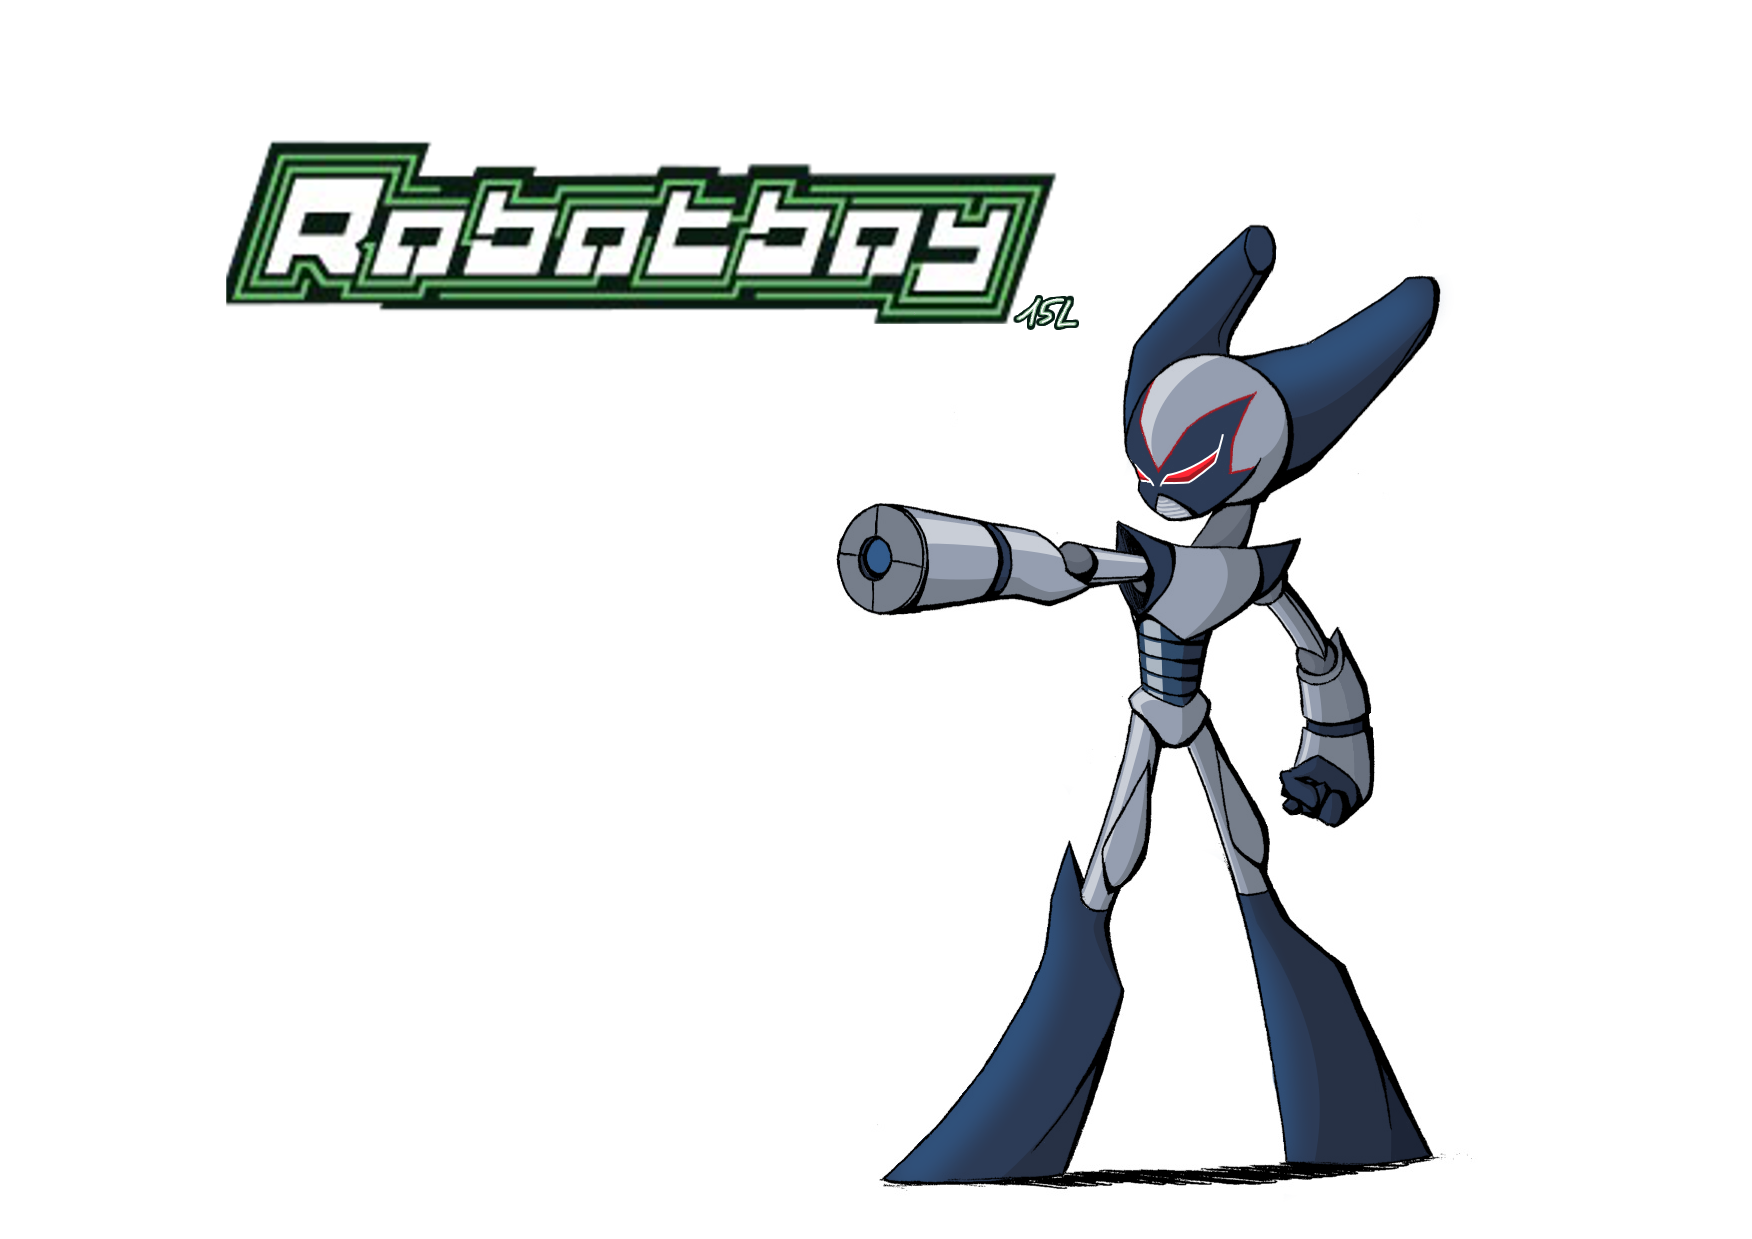 Robotboy But More French by ErykRogocz on DeviantArt